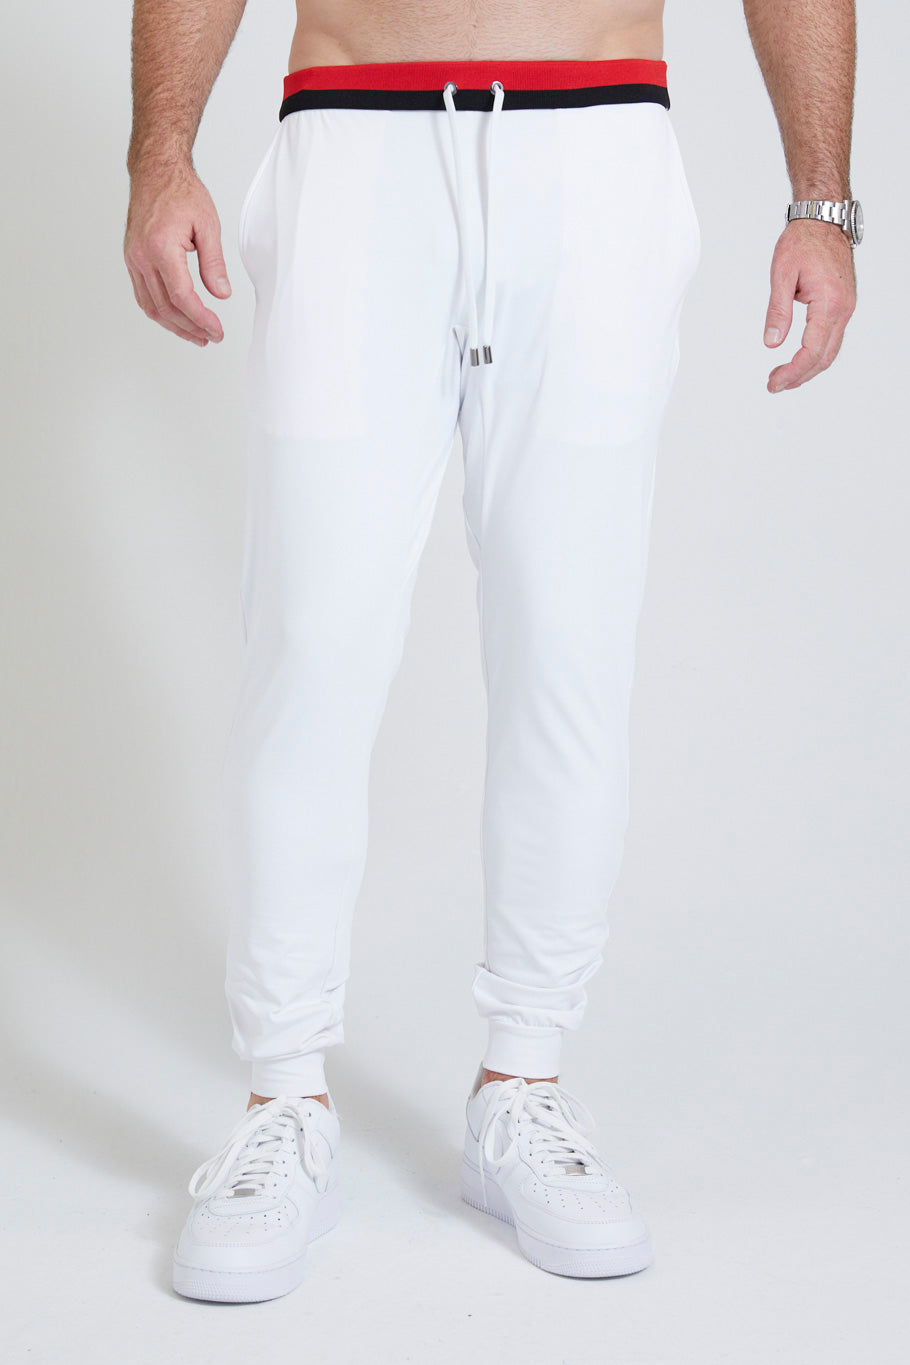 Image of the logan jogger in bright white ss23